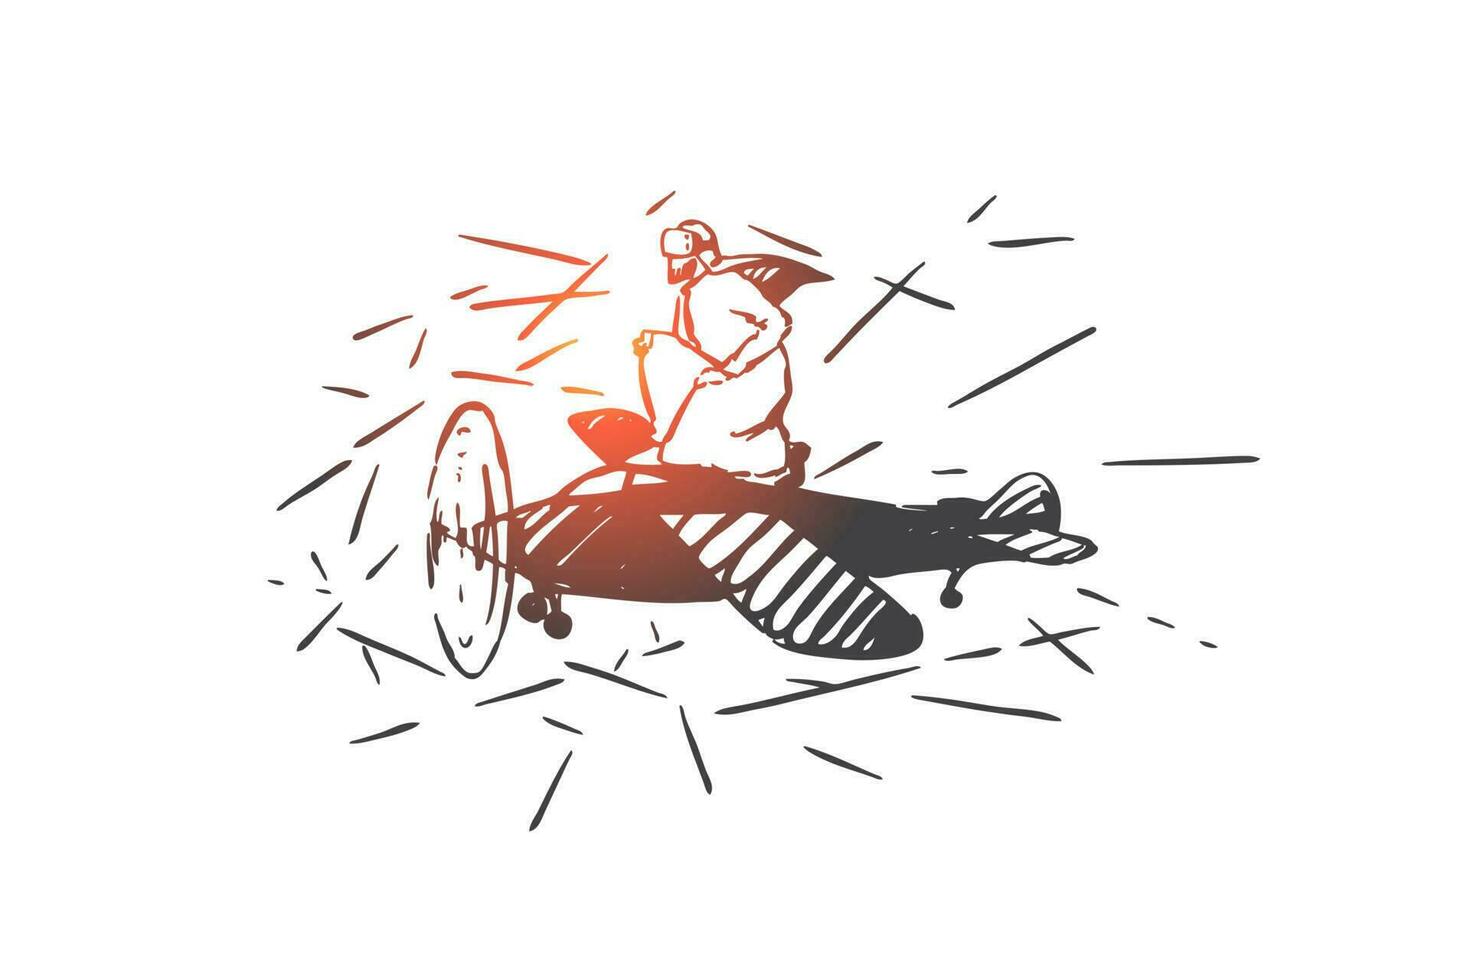 VR simulation, piloting concept sketch. Hand drawn isolated vector